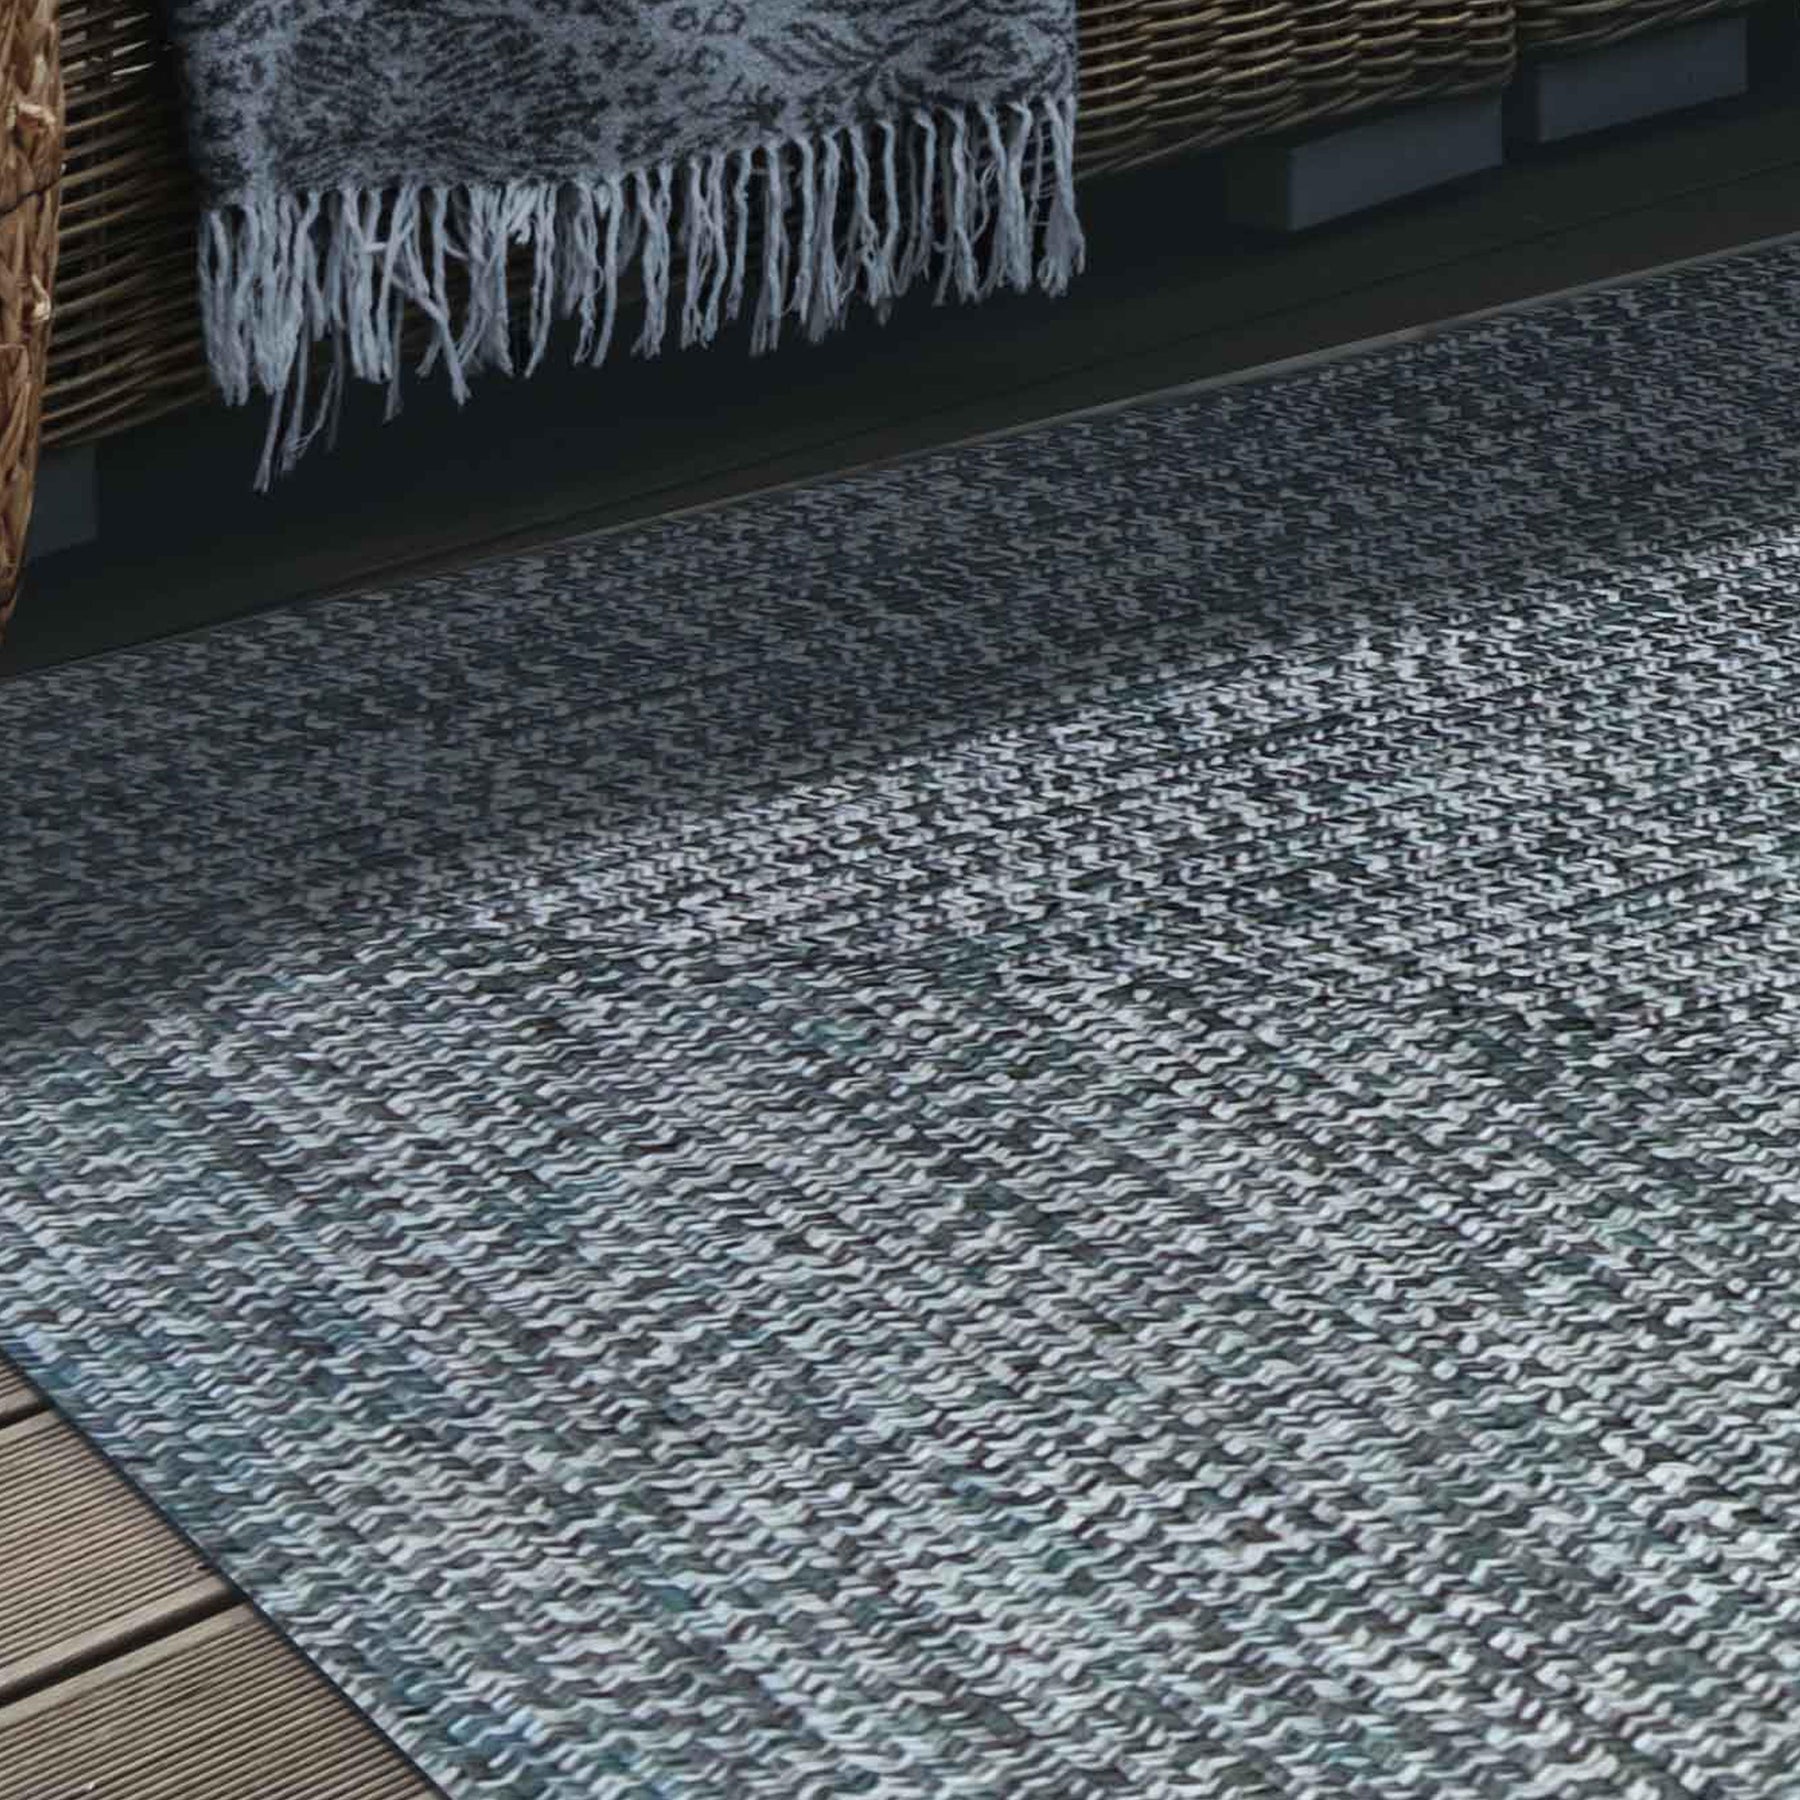 Superior Bohemian Multi-Toned Braided Patterned Indoor Outdoor Area Rug - Lagoonbreeze-White